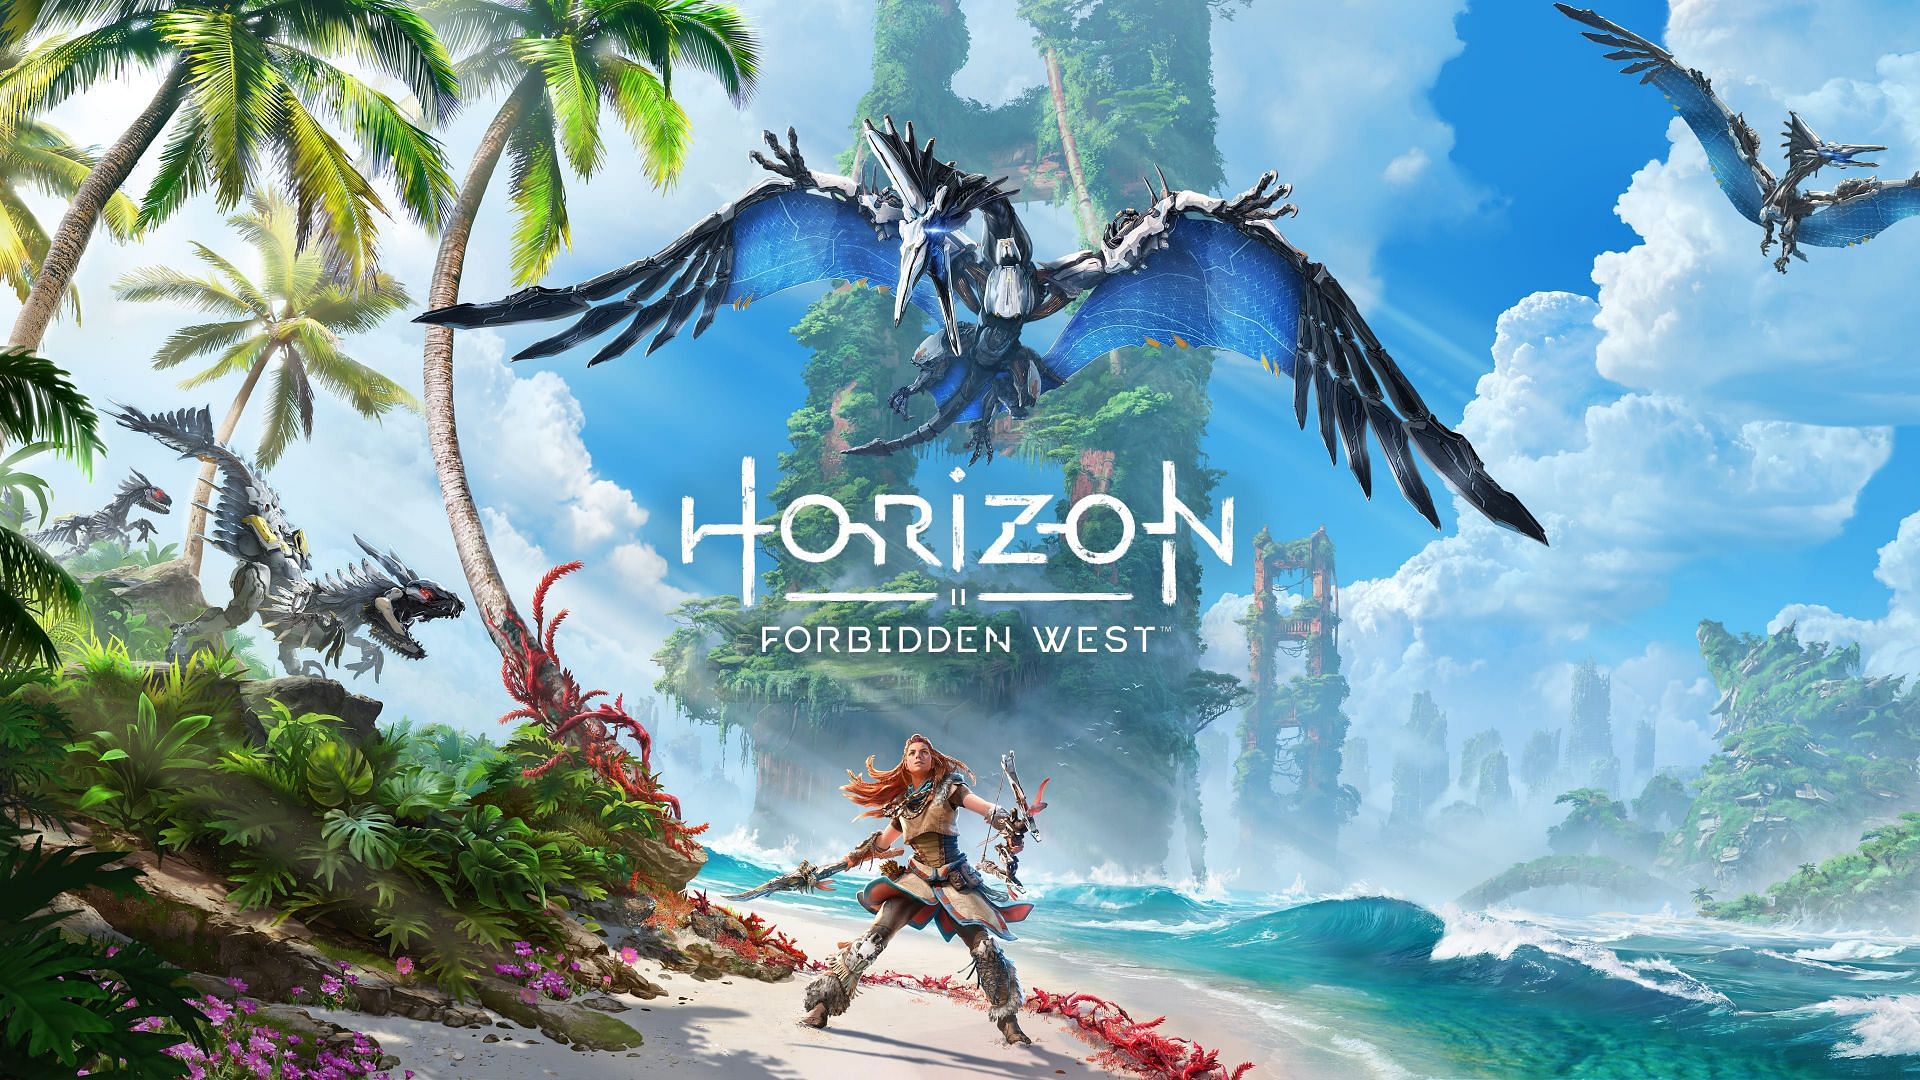 Best Horizon Forbidden West settings for PC (Image via Playstation)